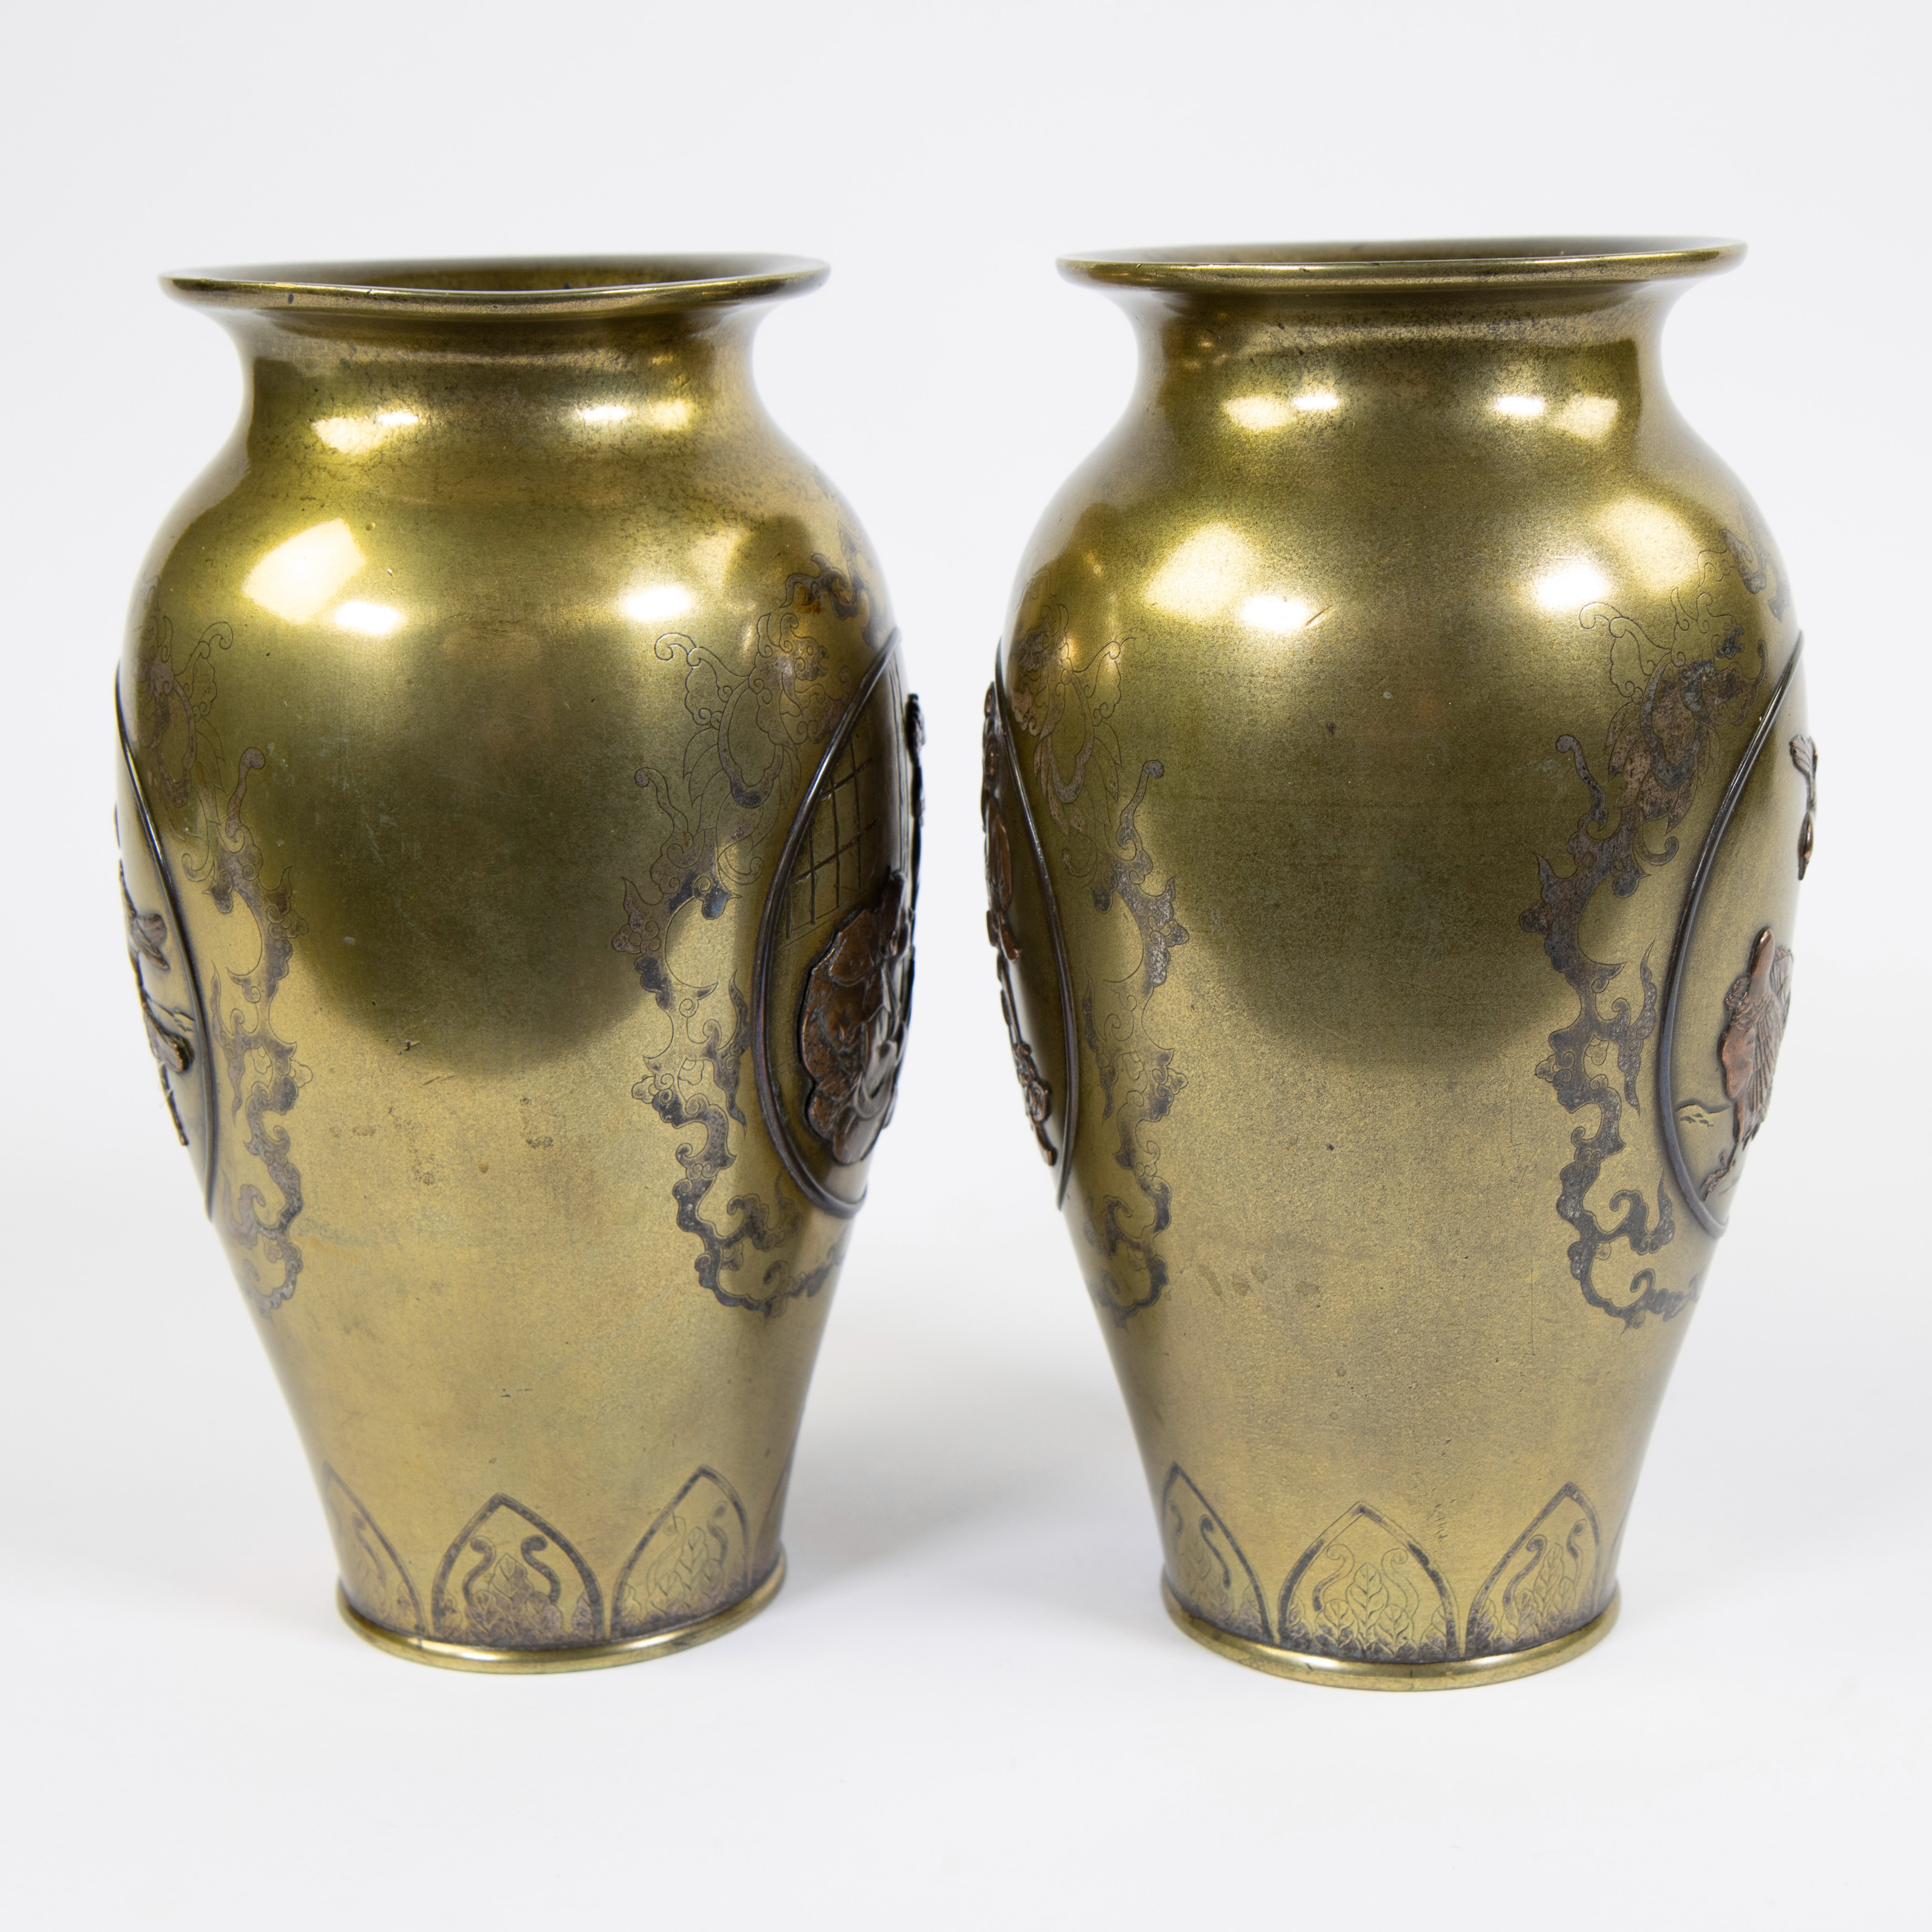 Pair of Japanese brass vases with copper decoration, ca 1900 - Image 4 of 5